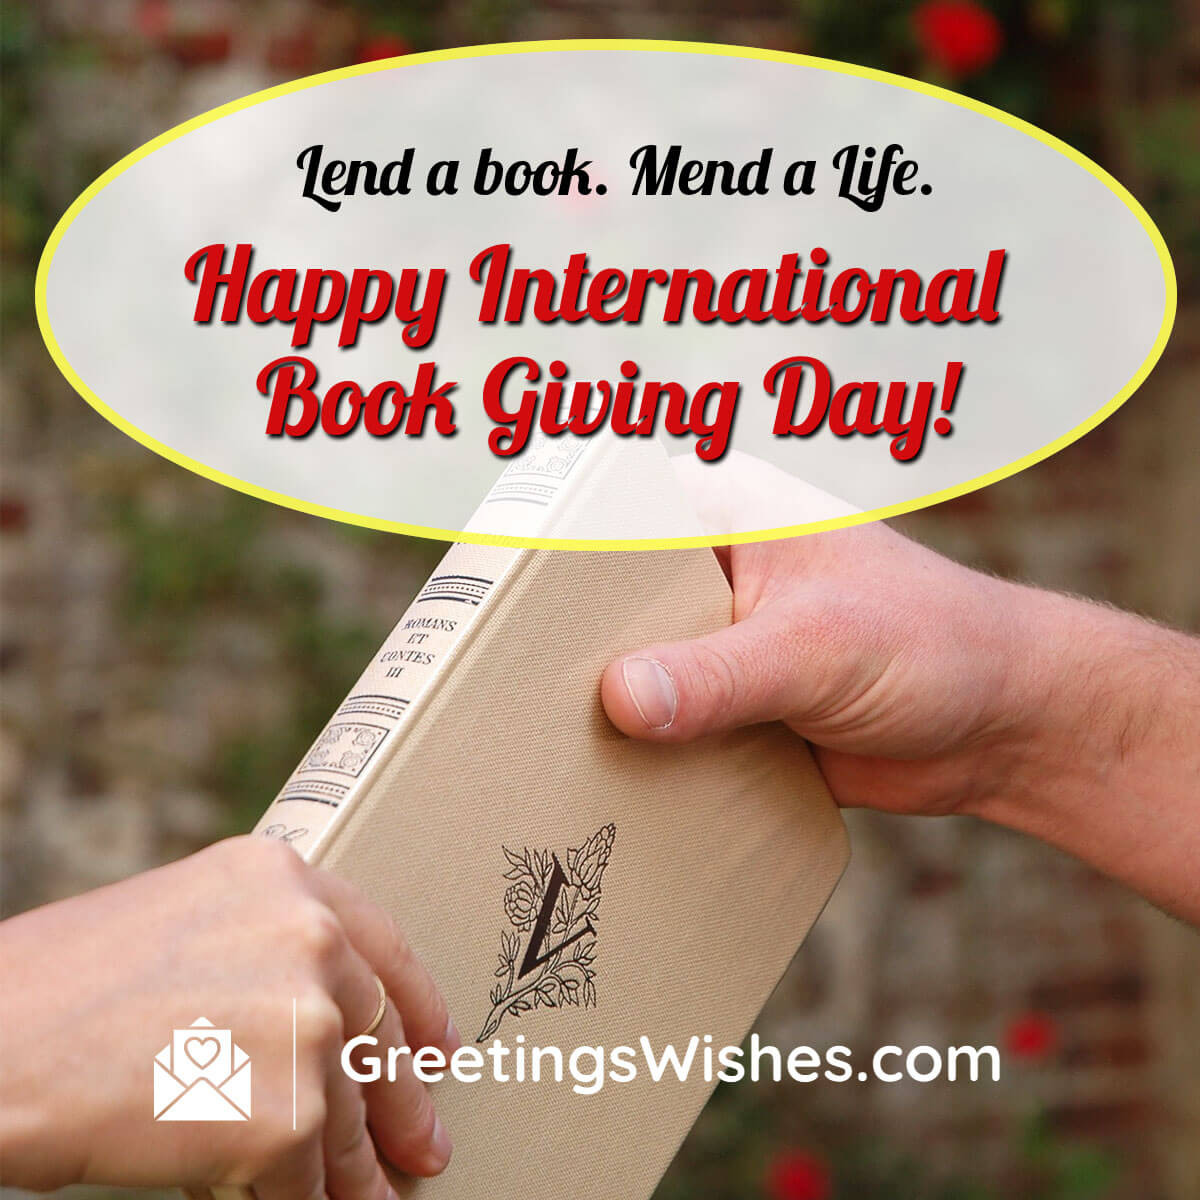 International Book Giving Day Wishes (14th February) Greetings Wishes